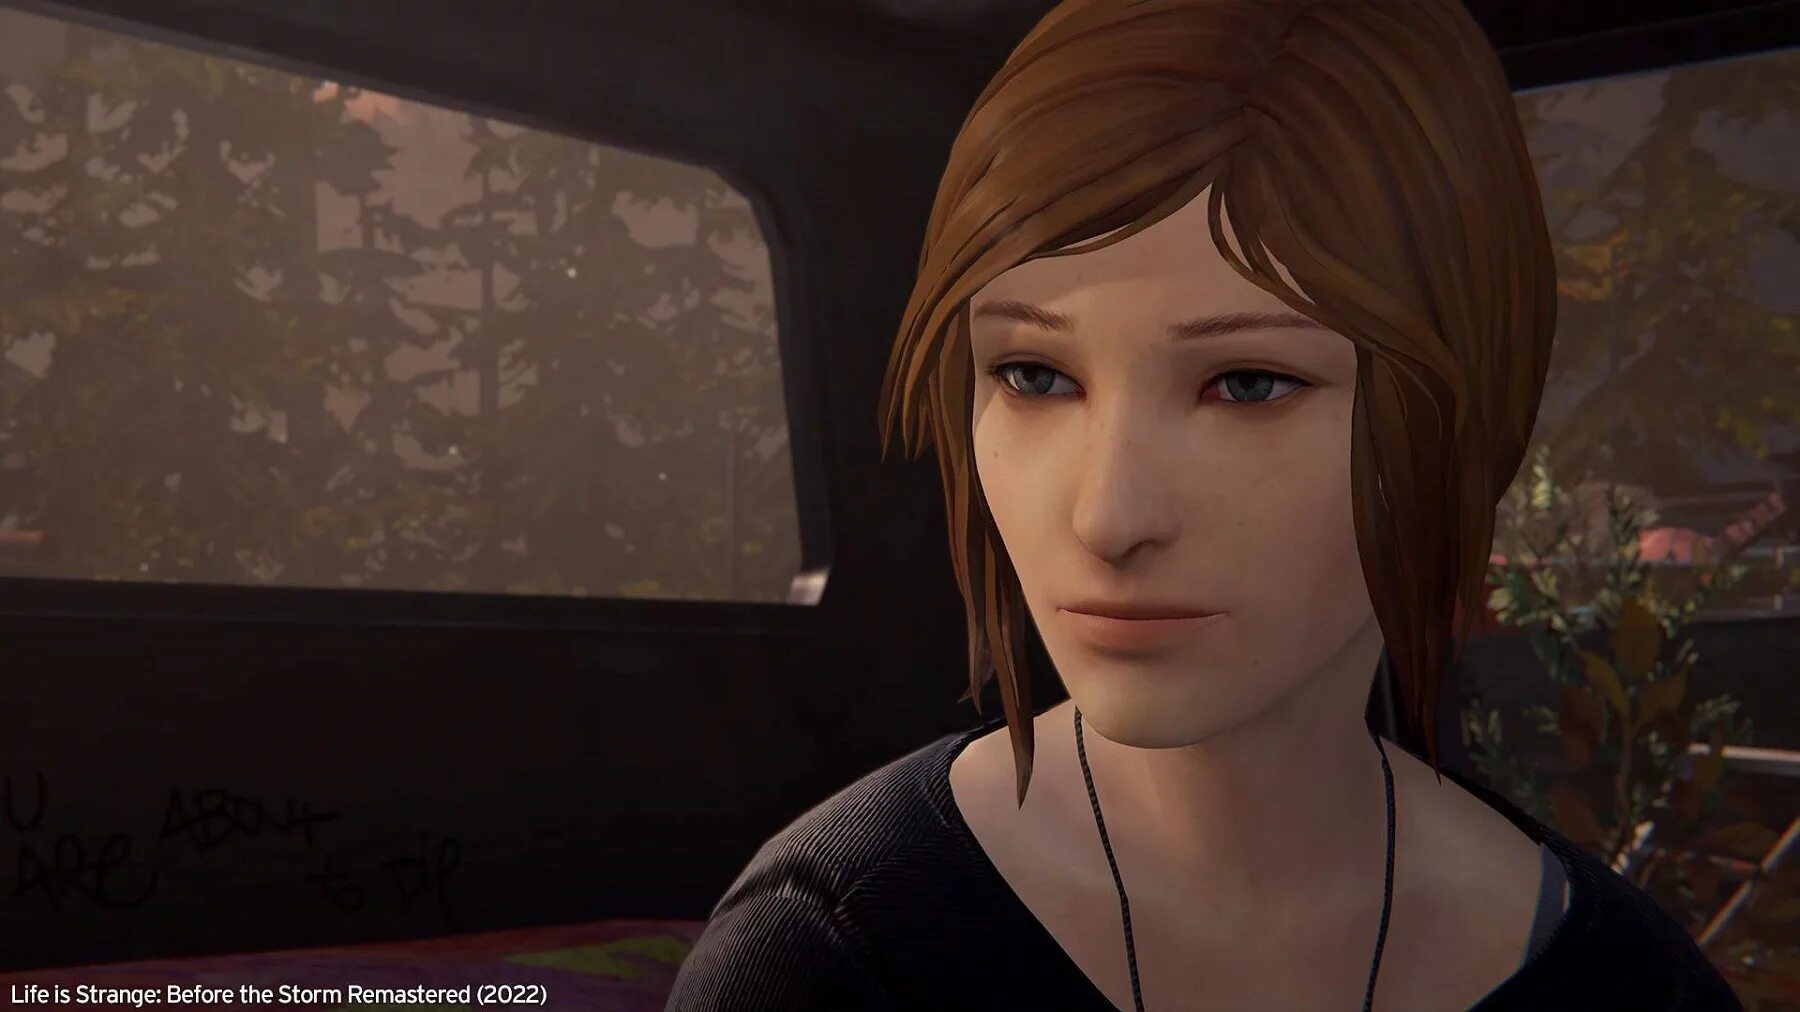 Life is Strange Remastered collection. Life is Strange before the Storm Remastered. Life is Strange Remastered collection Скриншоты. Life is Strange ремастер. Life is strange collection